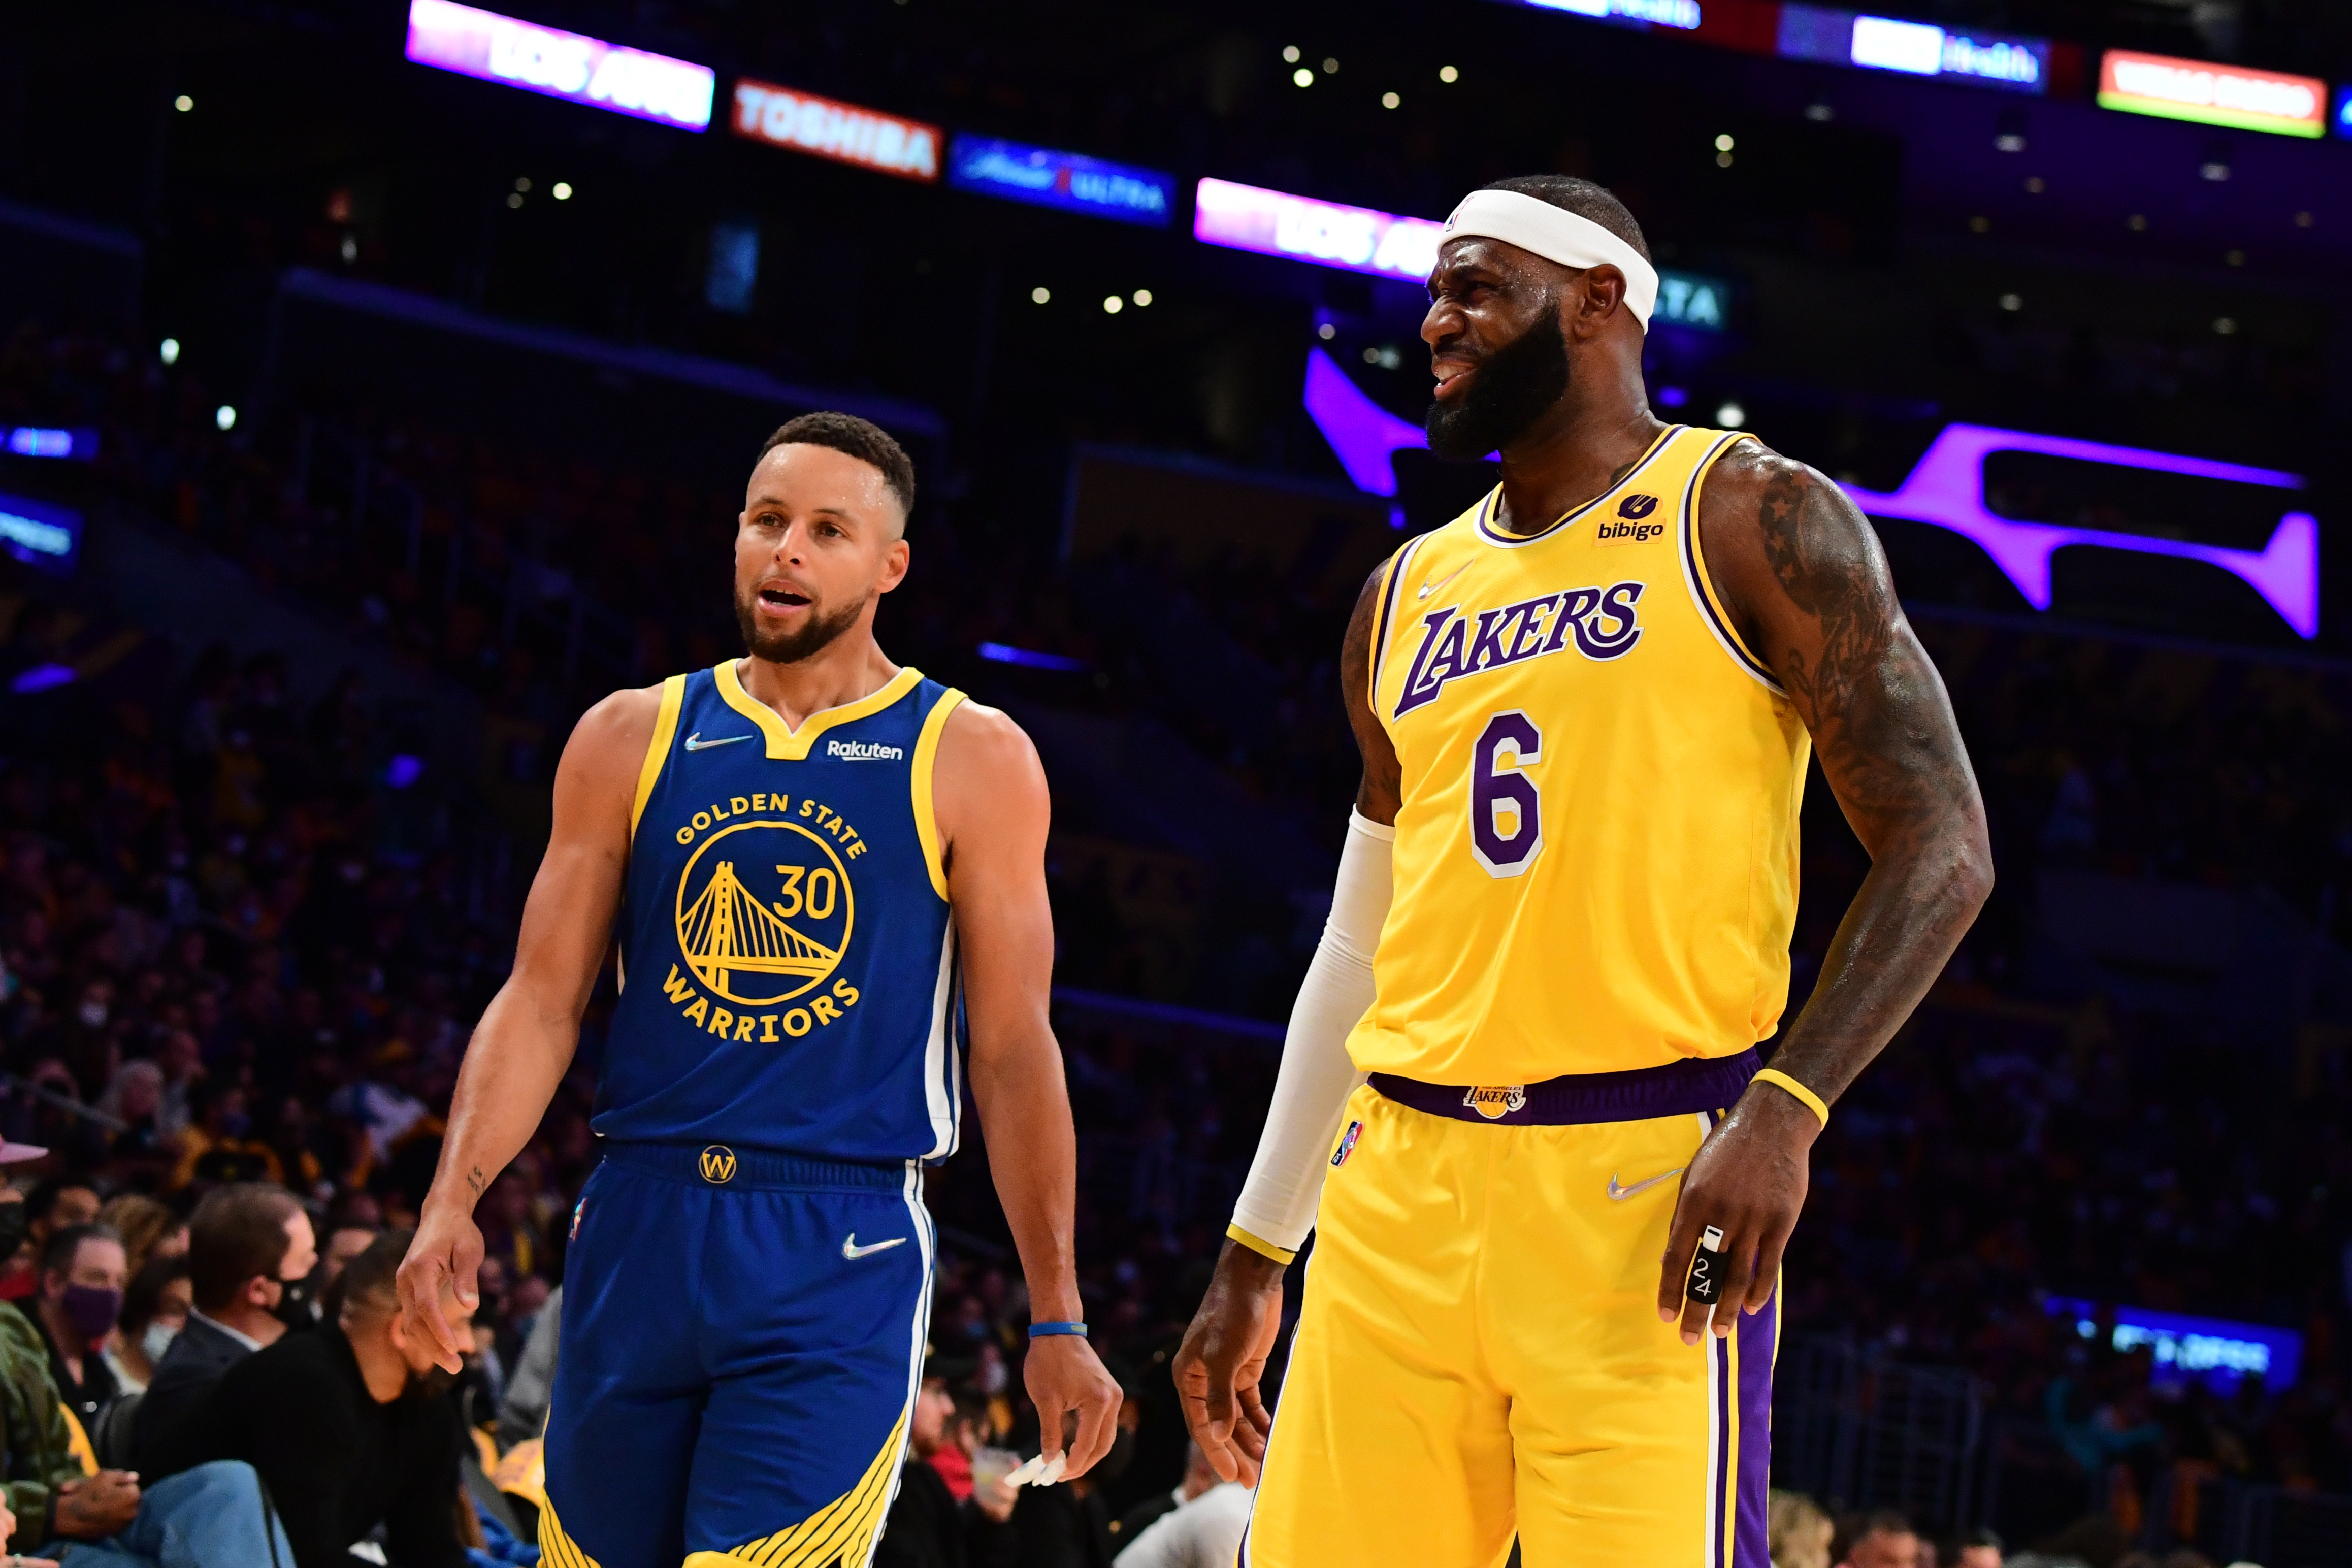 Steph Curry and L.A. Lakers leads jersey sales and team